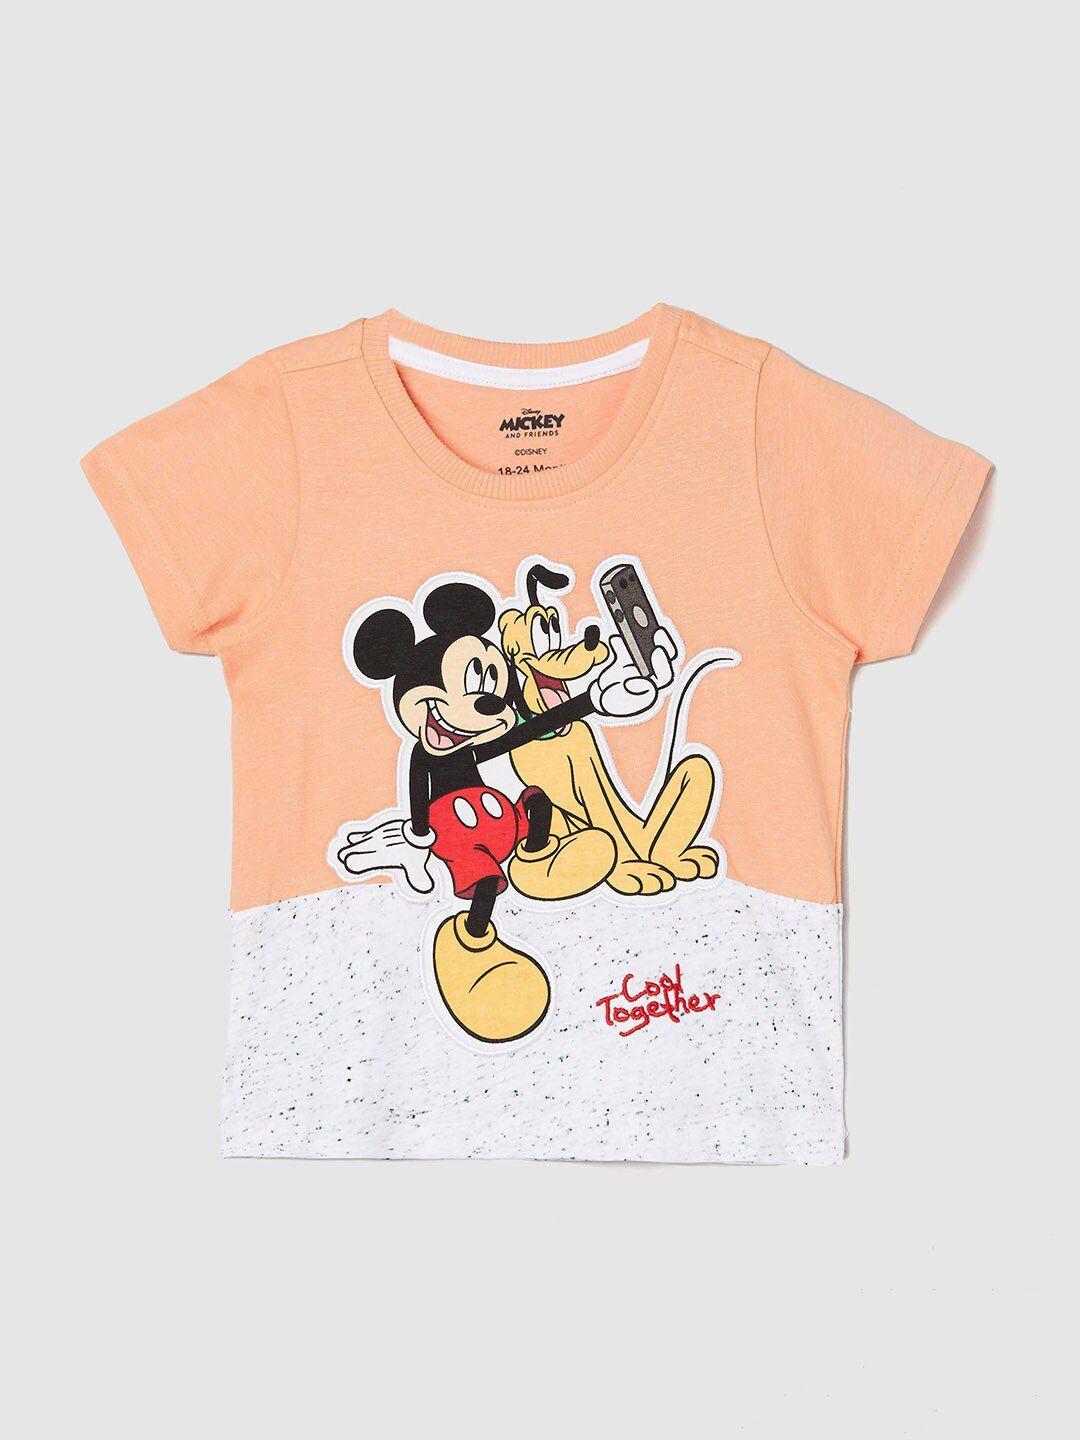 max-infant-boys-mickey-mouse-printed-cotton-t-shirt